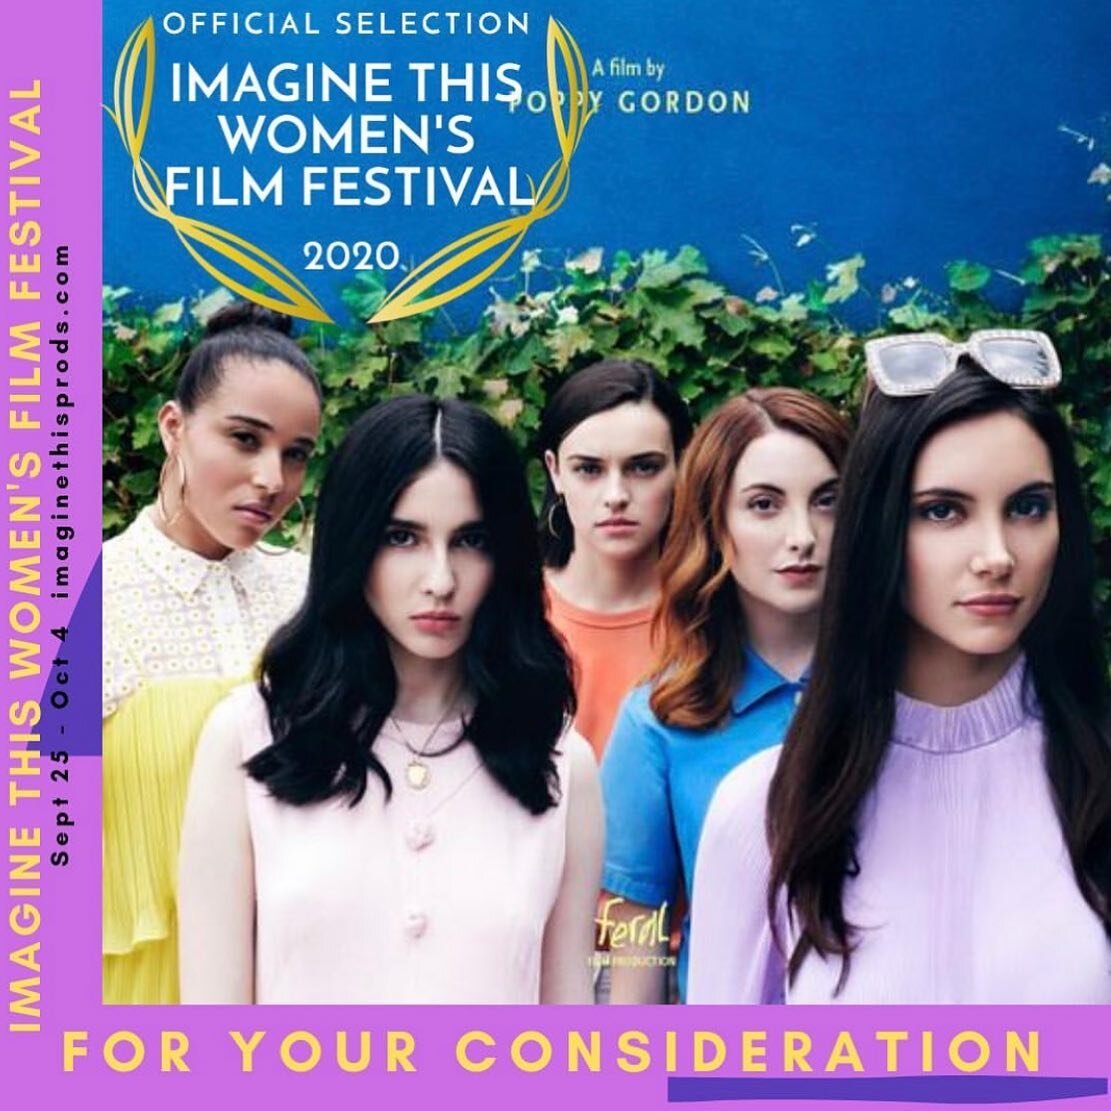 Thank you to @imagineprods for including us in their upcoming 2020 festival lineup! This is a special festival and organization supporting female film creators from all walks of life and new ways of entrepreneurship and we are proud to be a part of i